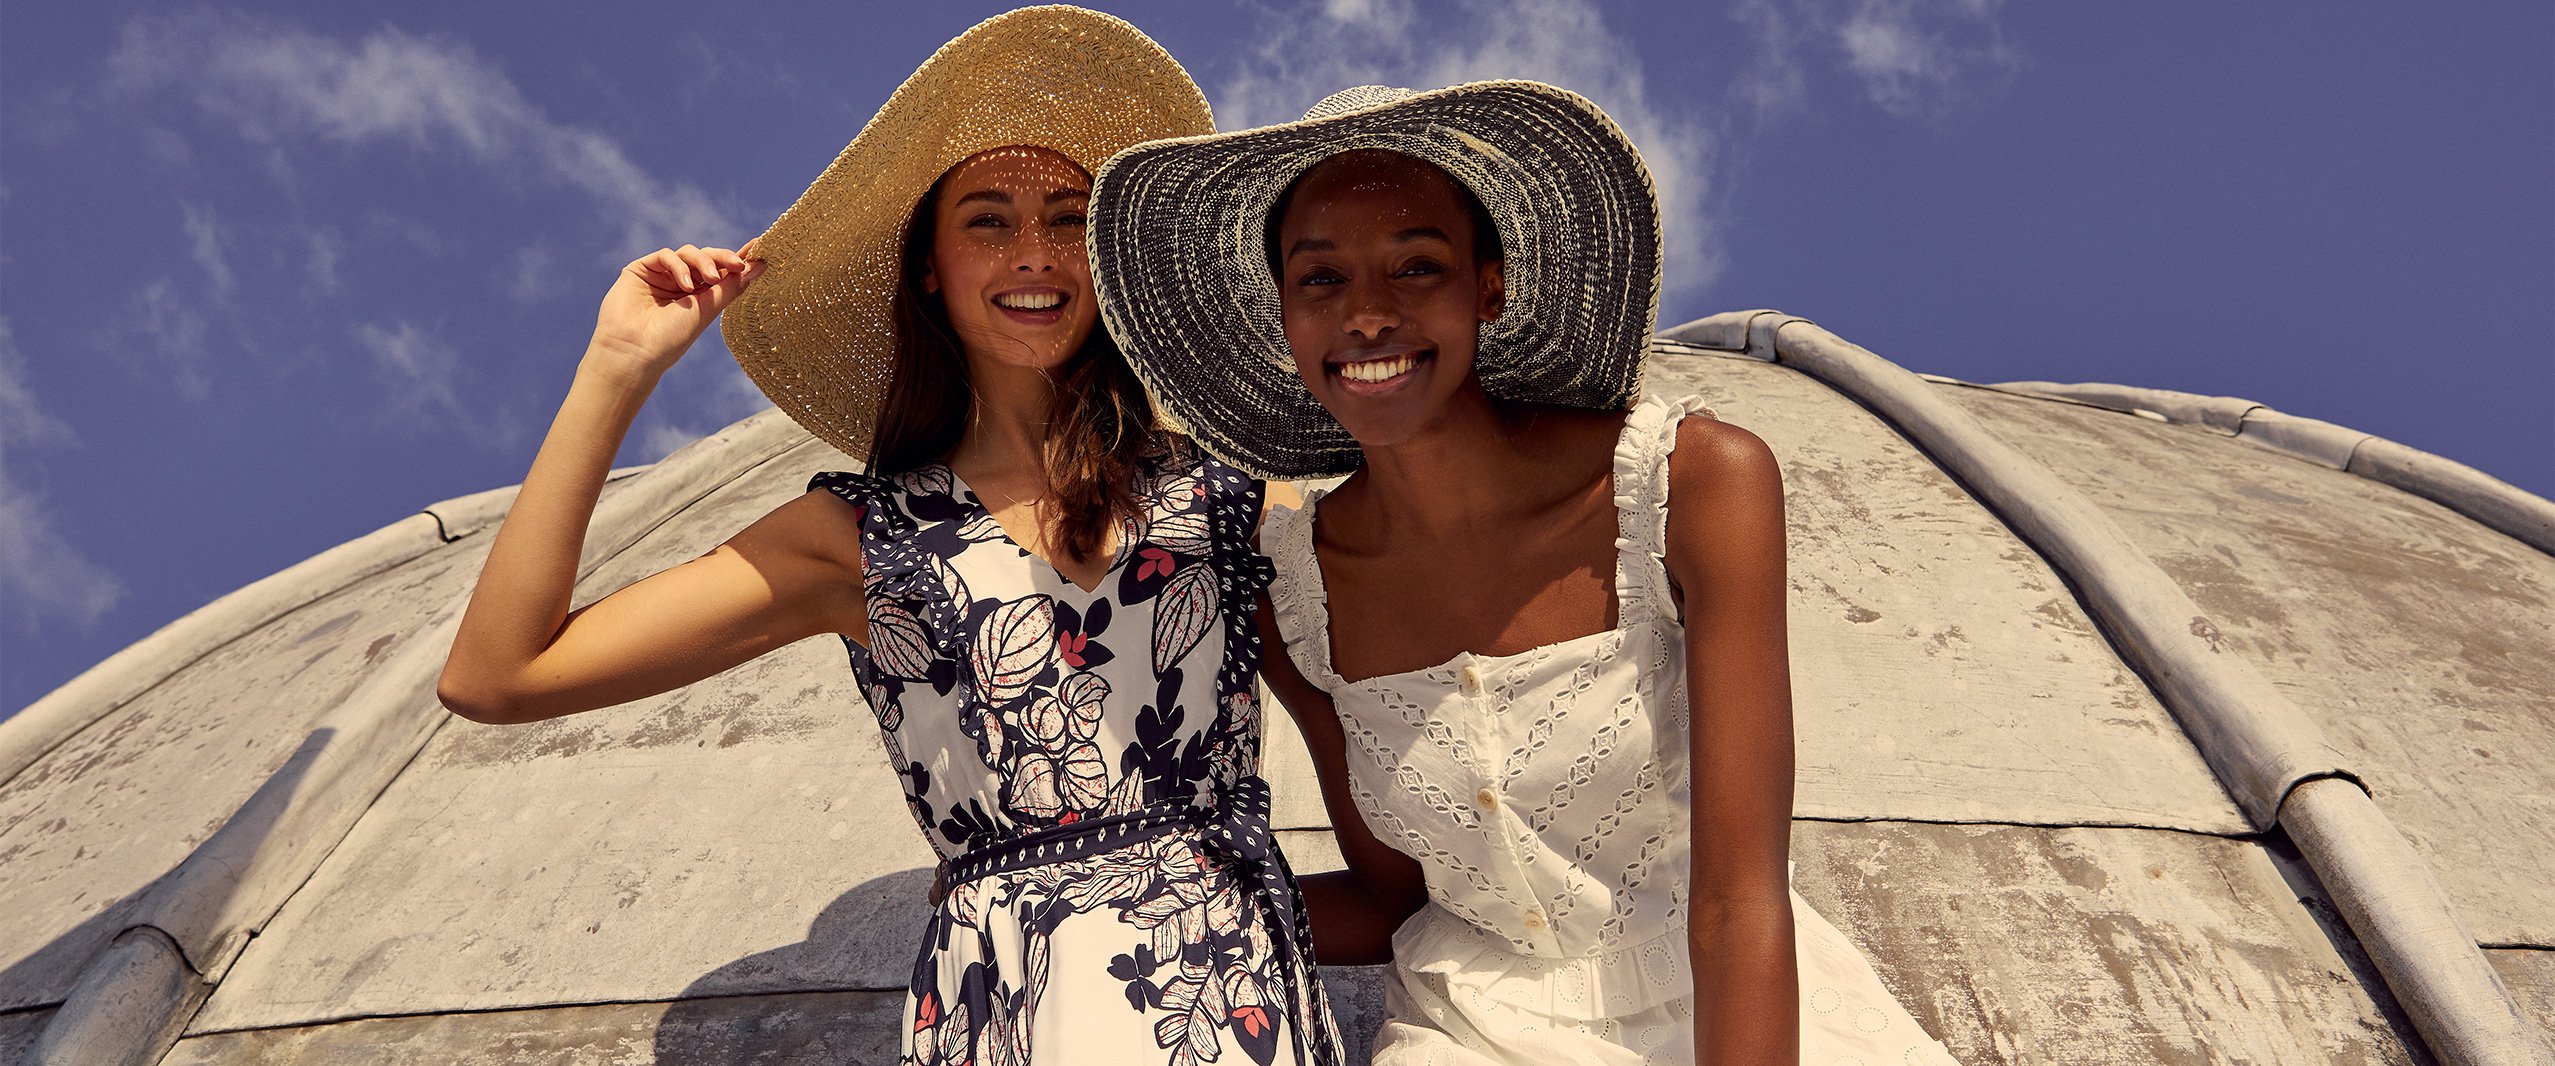 This summer, we’re embracing the spirit of optimism, energy and renewal. Discover our new sunshine-ready styles, designed with staycations - and holidays to come - in mind.